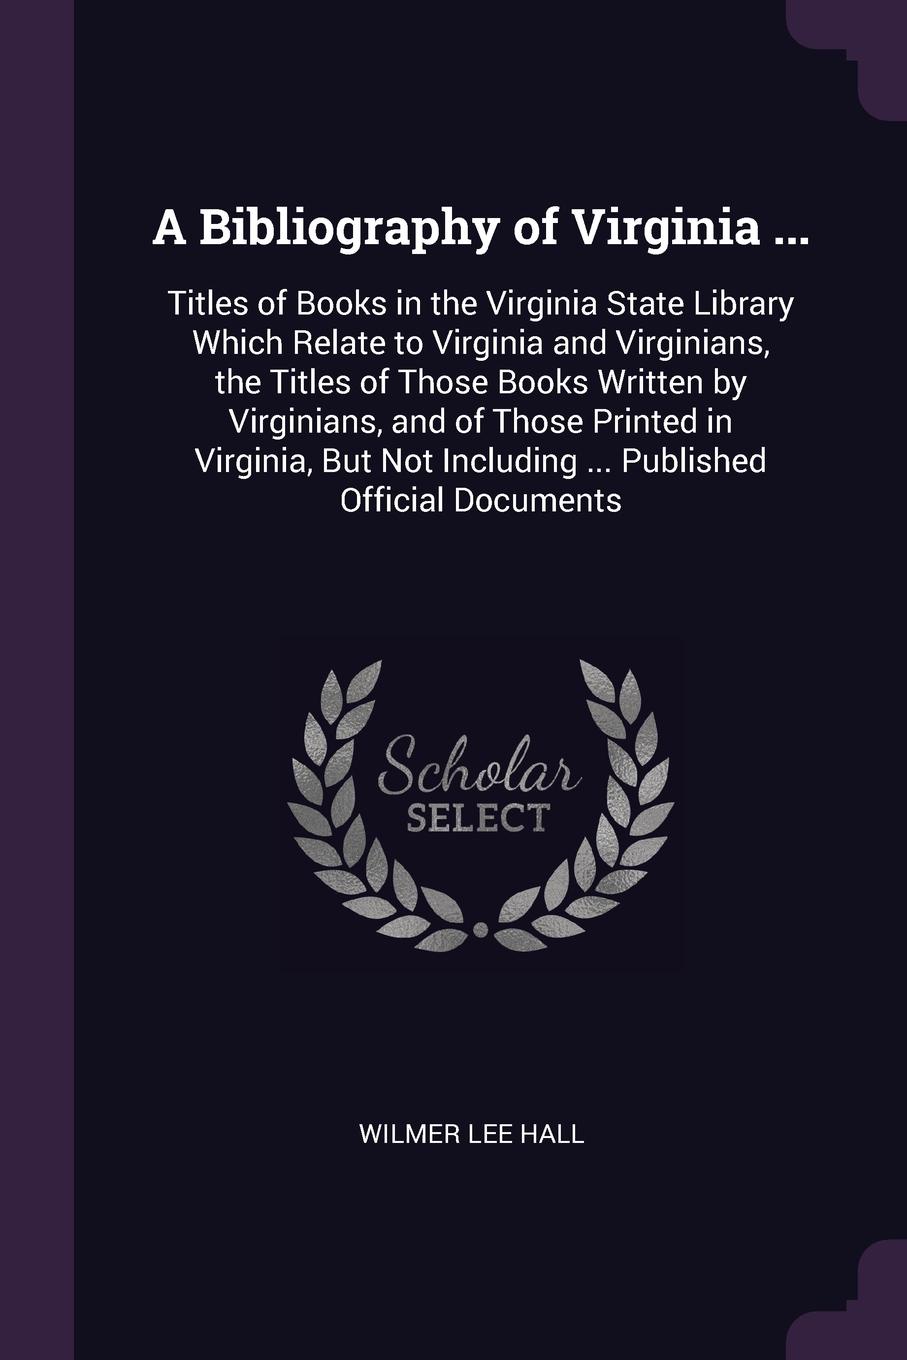 A Bibliography of Virginia ... Titles of Books in the Virginia State Library Which Relate to Virginia and Virginians, the Titles of Those Books Written by Virginians, and of Those Printed in Virginia, But Not Including ... Published Official Docum...